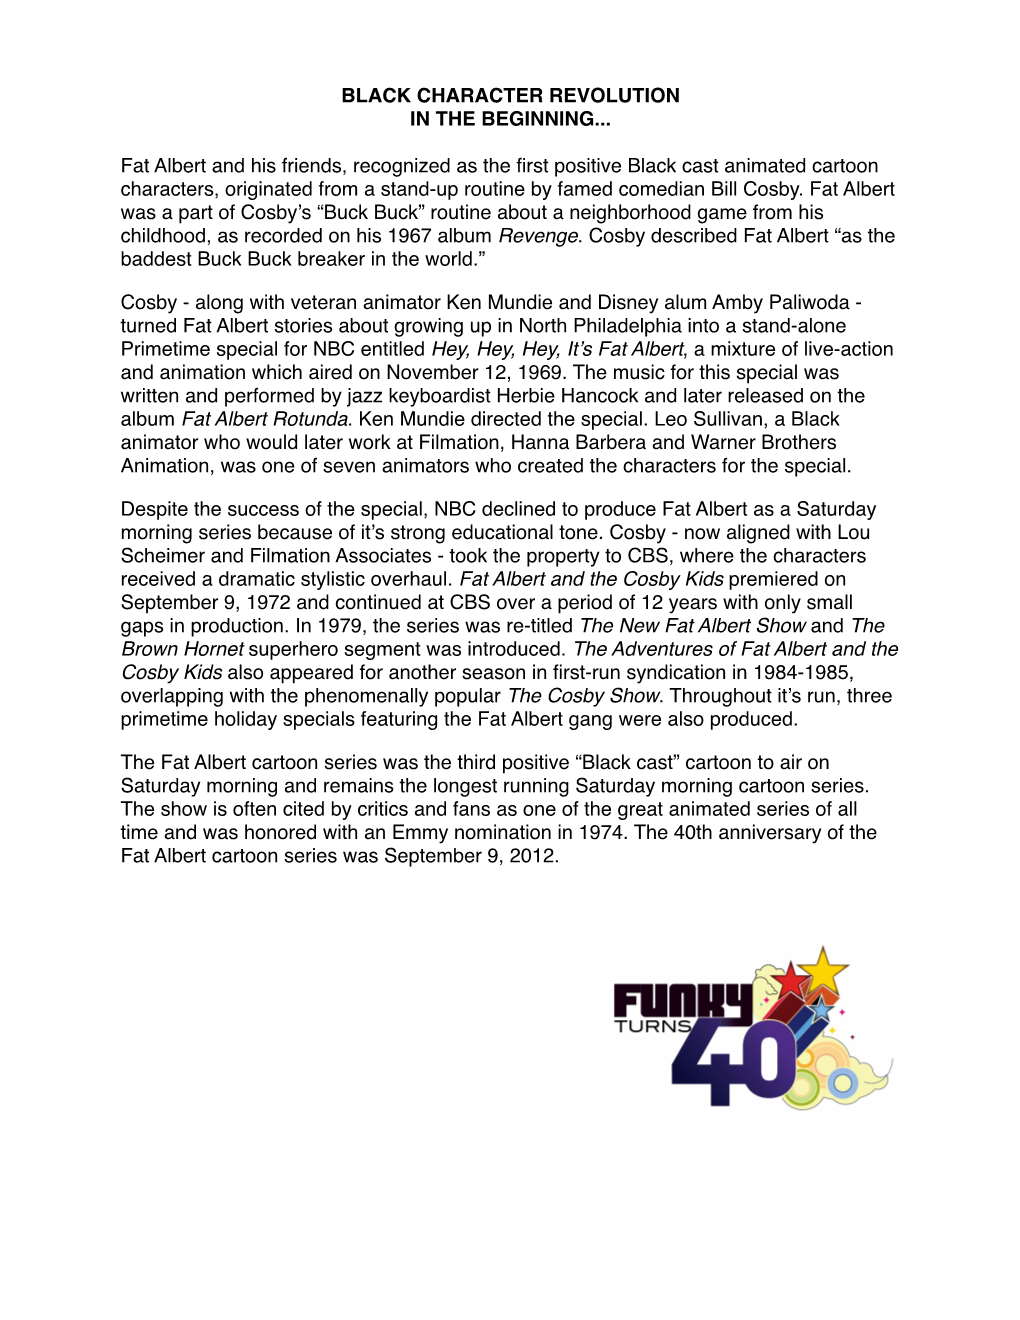 Funky Turns 40 Black Character Revolution Text Panel 2